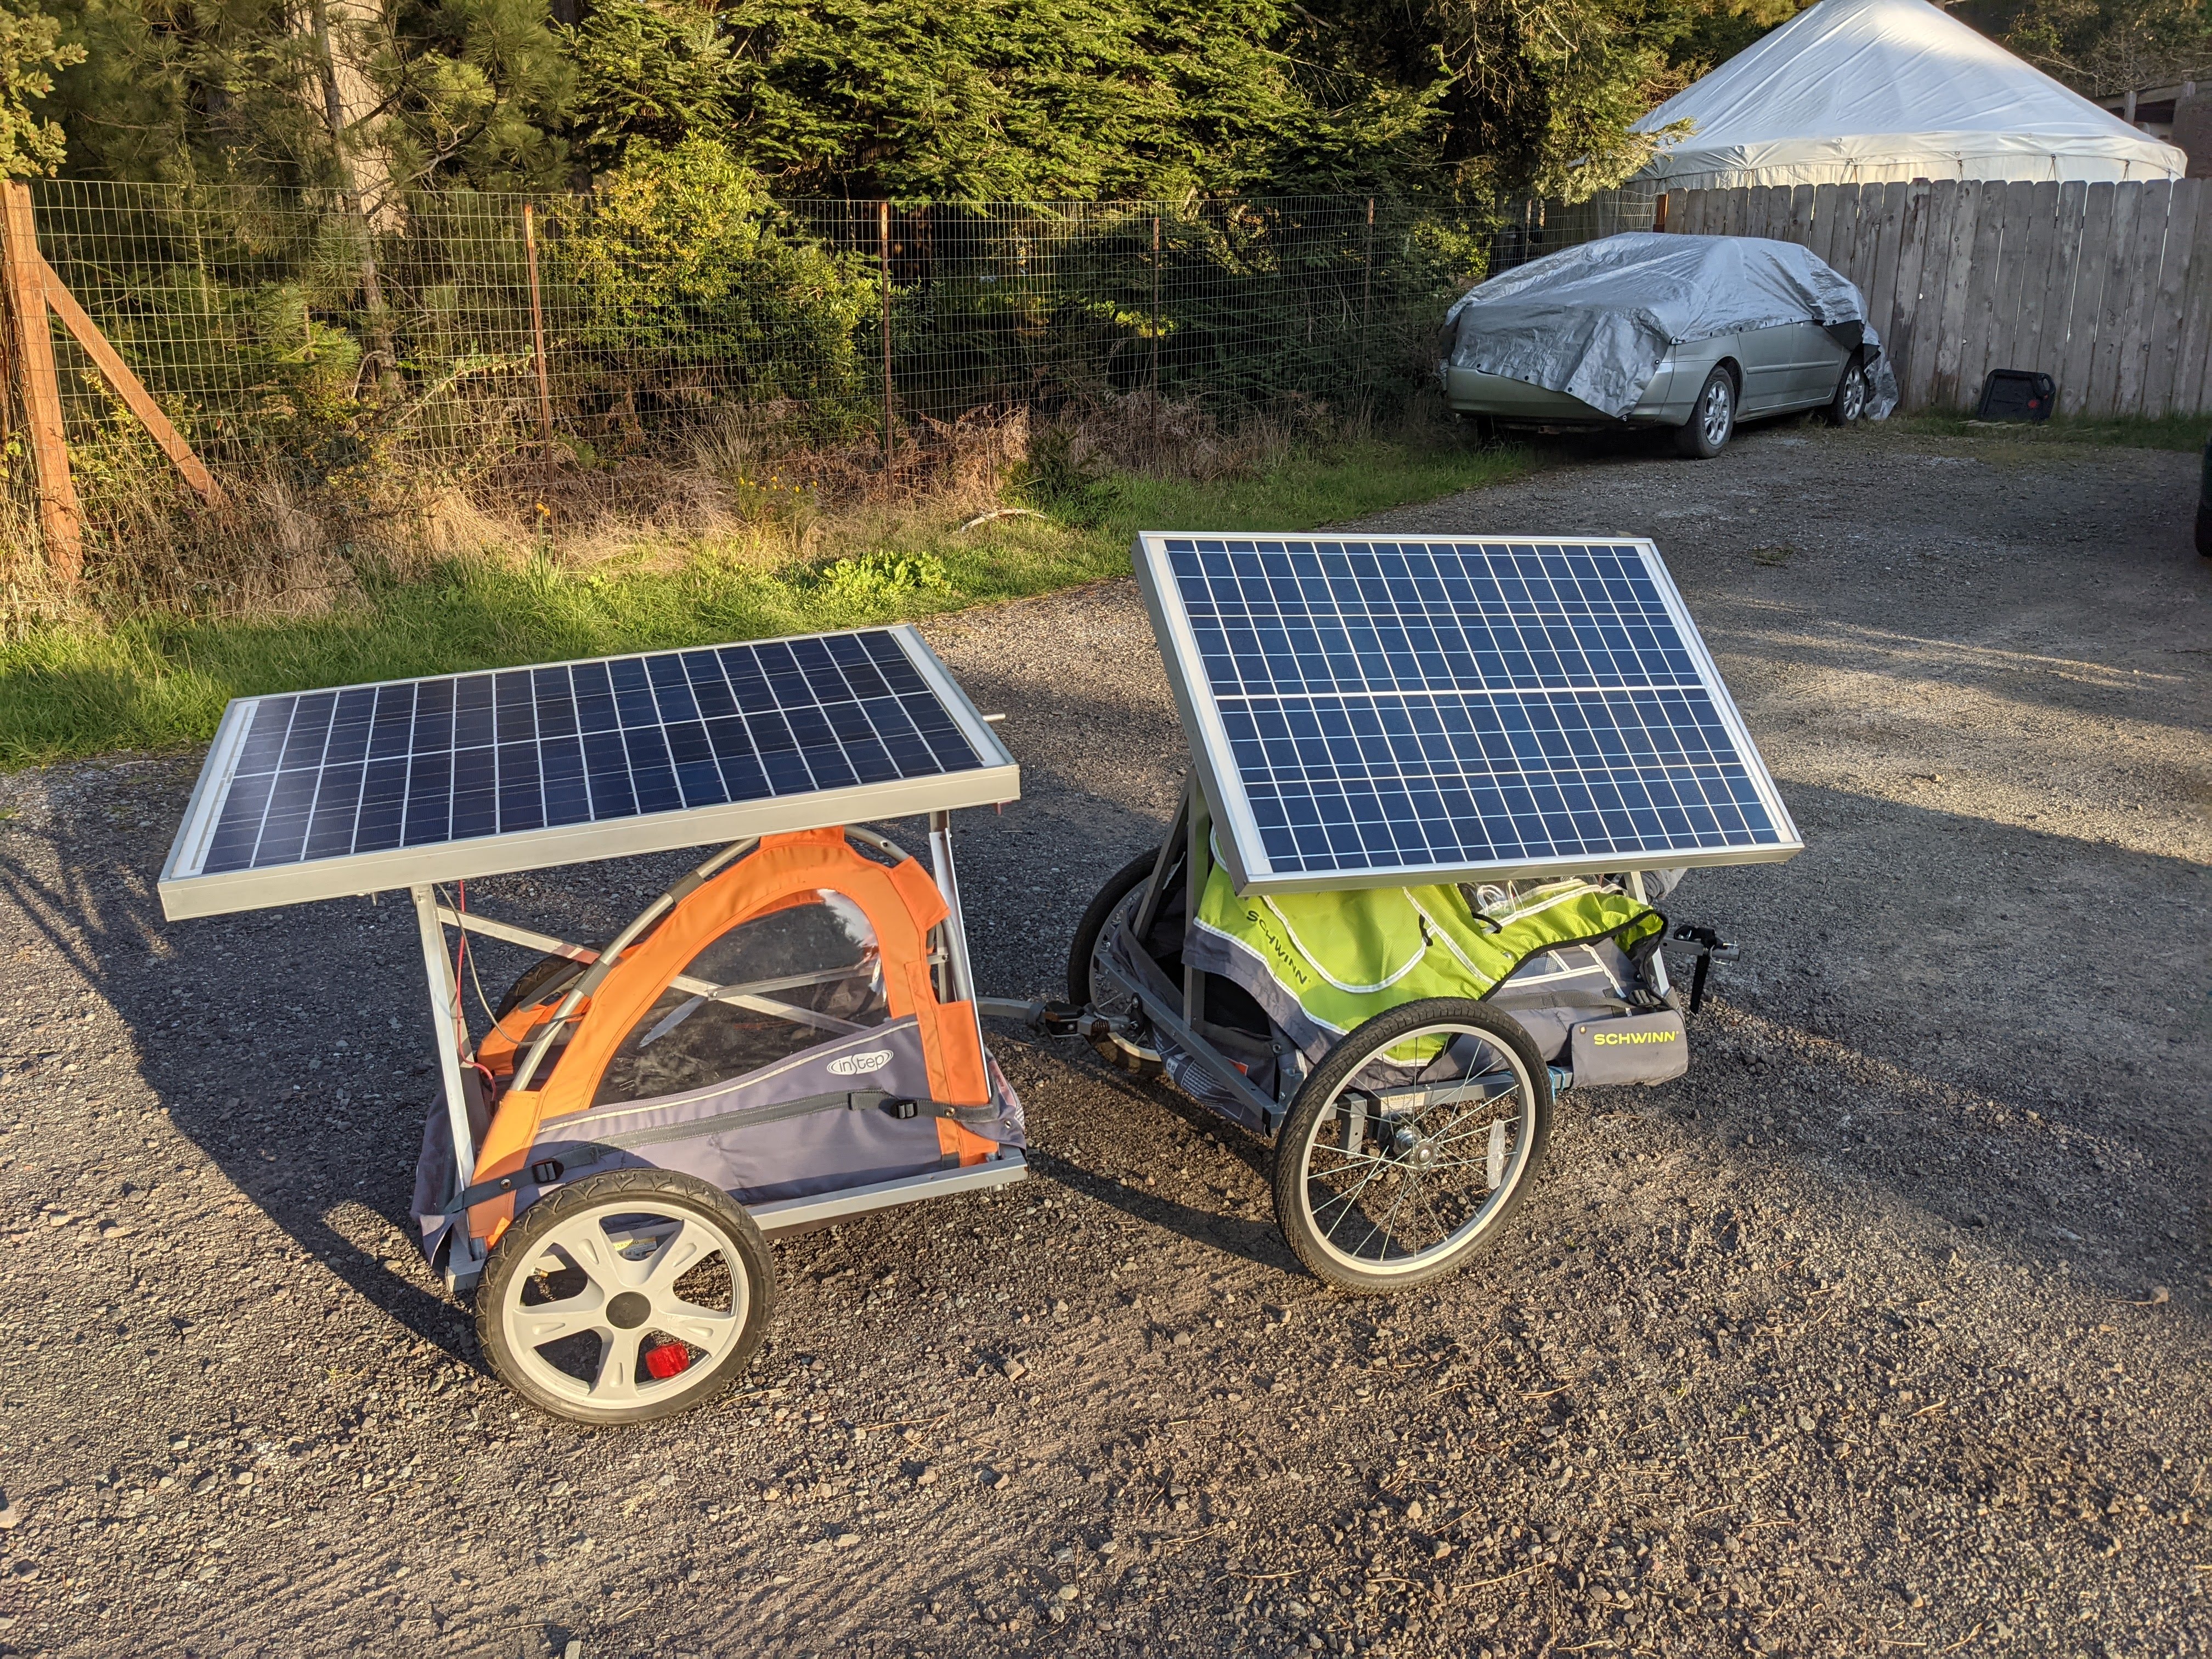 solar panel trailer connected using pivoting attachment arms